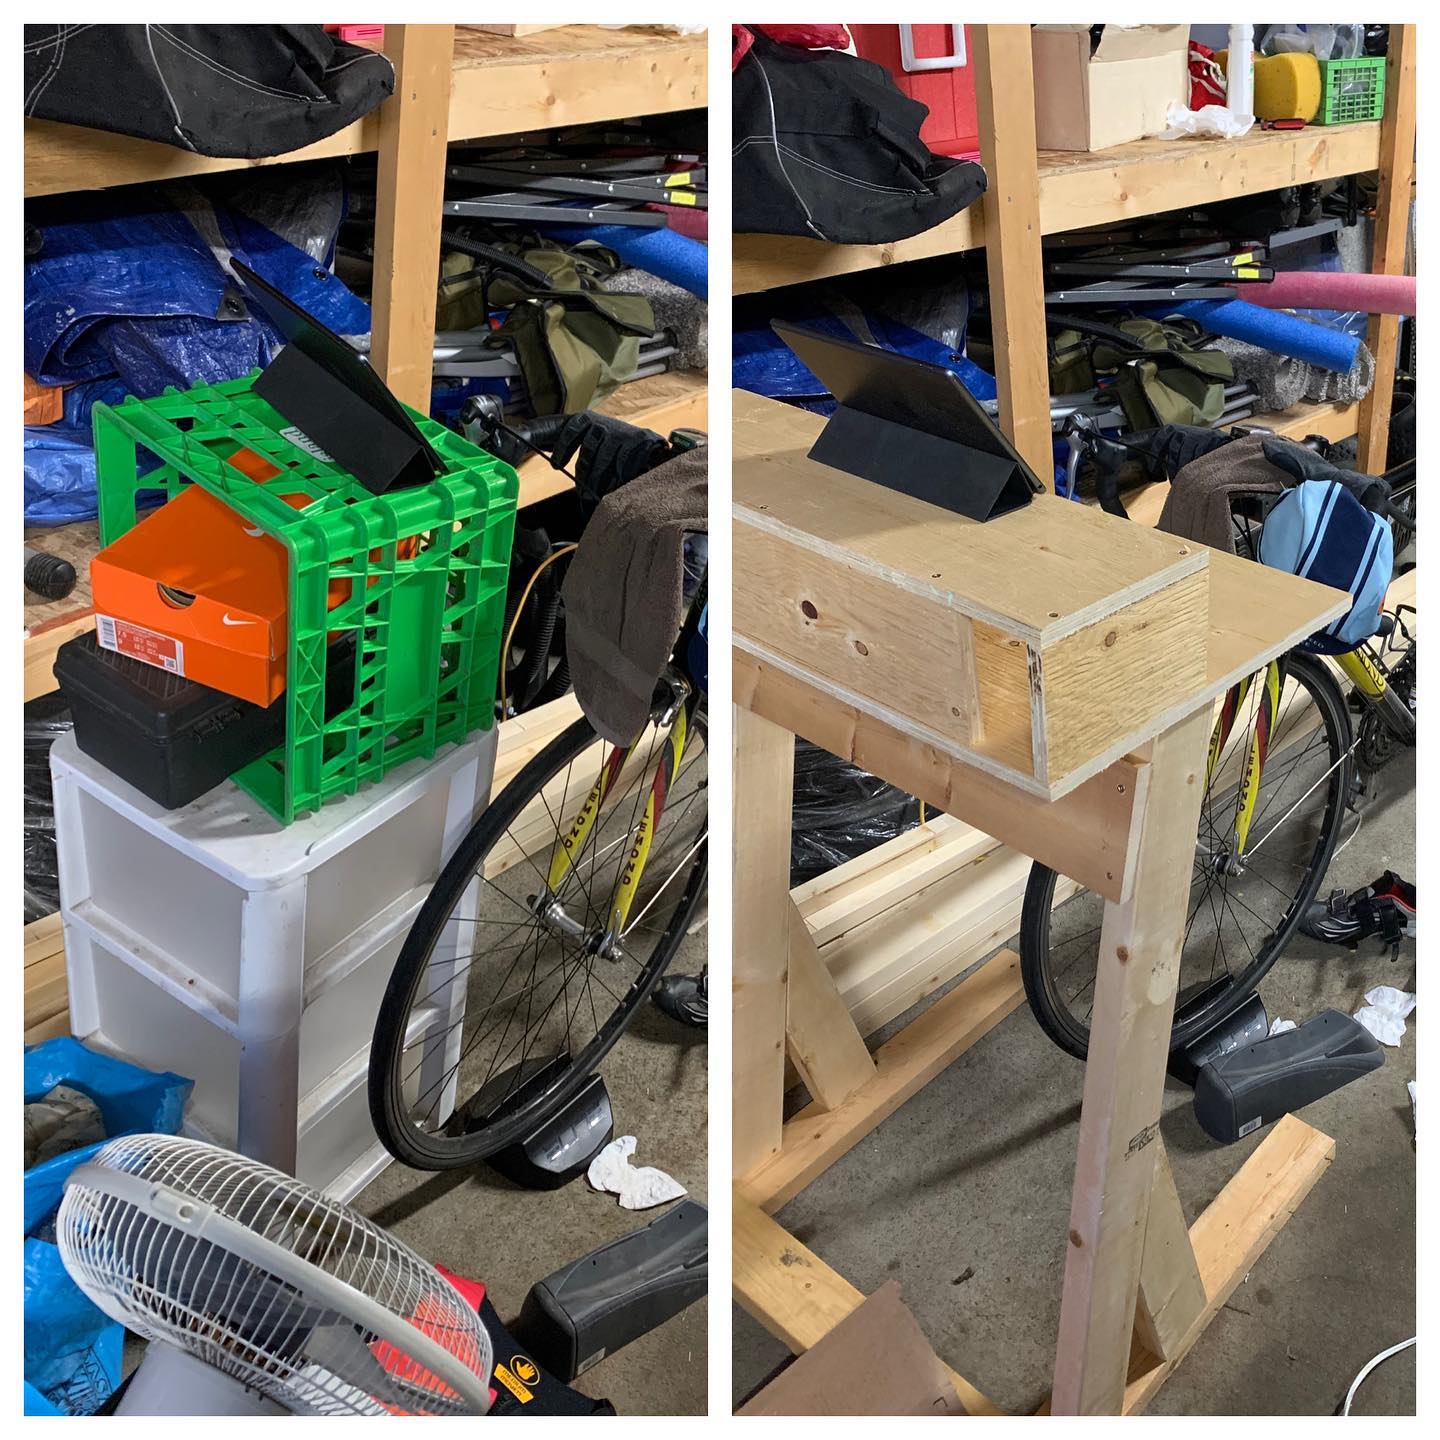 A little @gozwift pain cave upgrade today. Saw a video on @zwiftinsider and figured I had almost all the wood on hand. Bought screws and pilfered on 2x4 from another project to complete it. Later I might build a bottle holder, and maybe try a better iPad holder. #zwift #paincave #zwiftdesk #upgrade